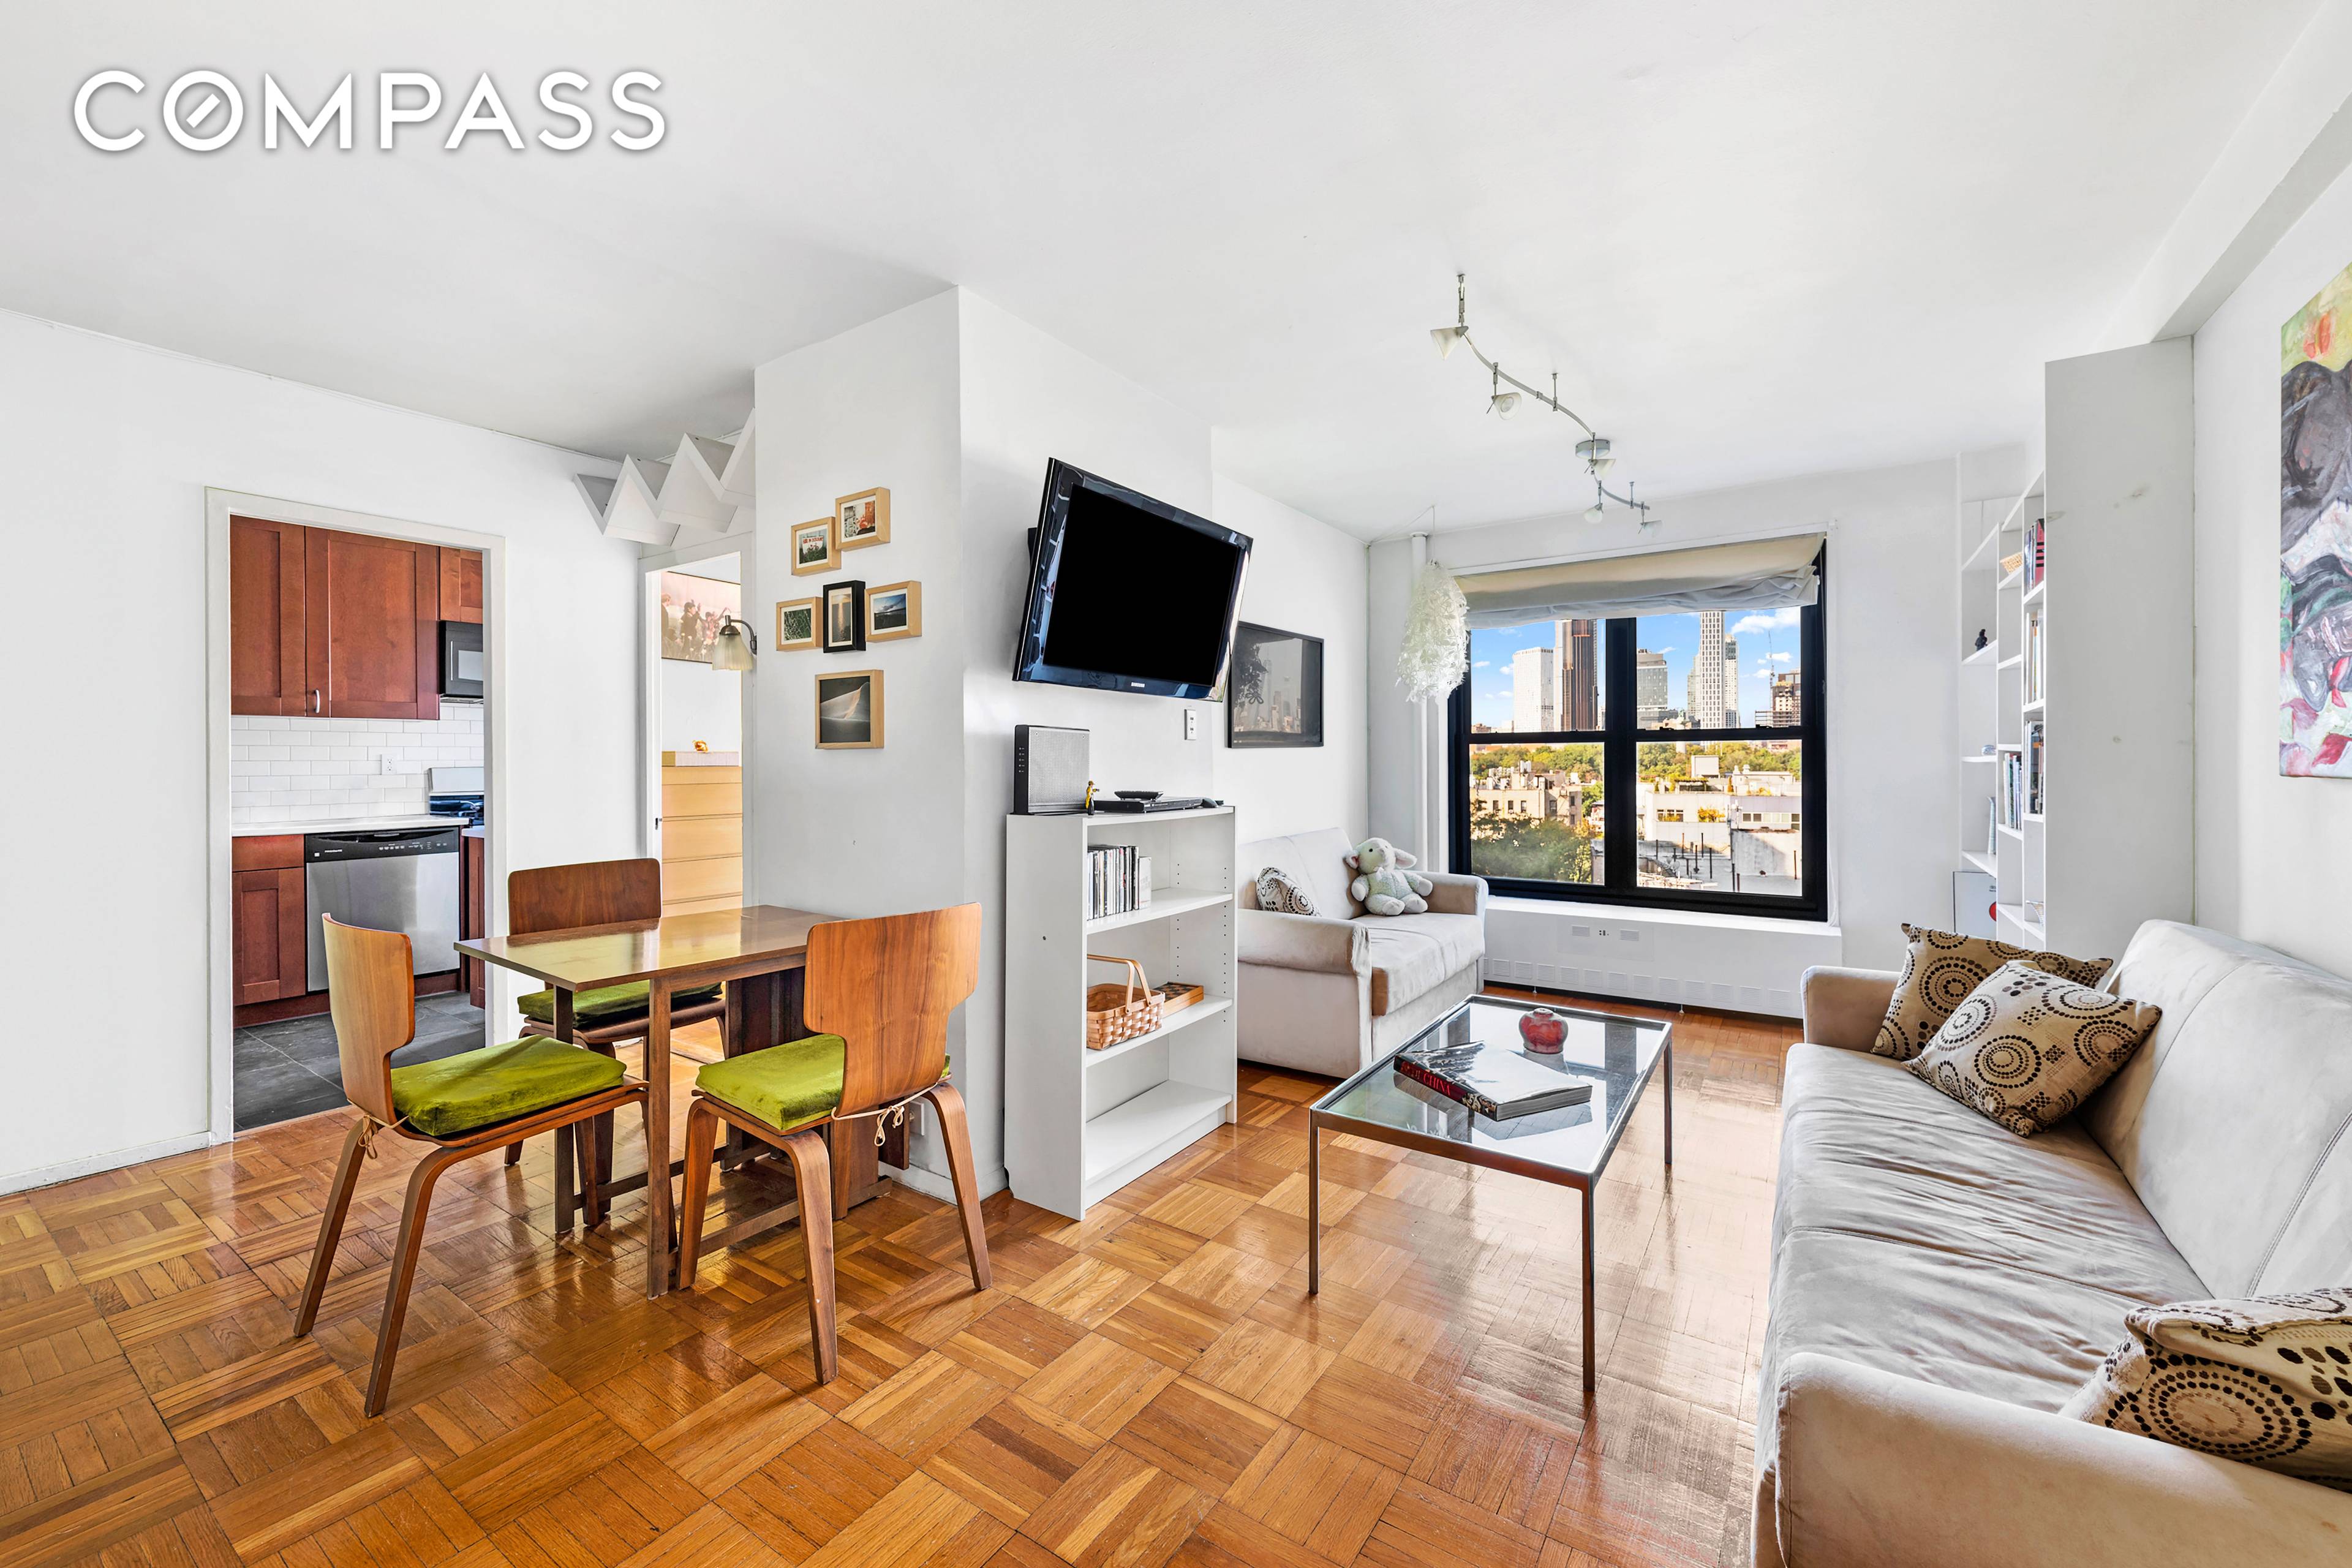 Convertible 2 bedroom apartment with sweeping views and a renovated kitchen for sale in the desirable Clinton Hill Co Ops North Campus.